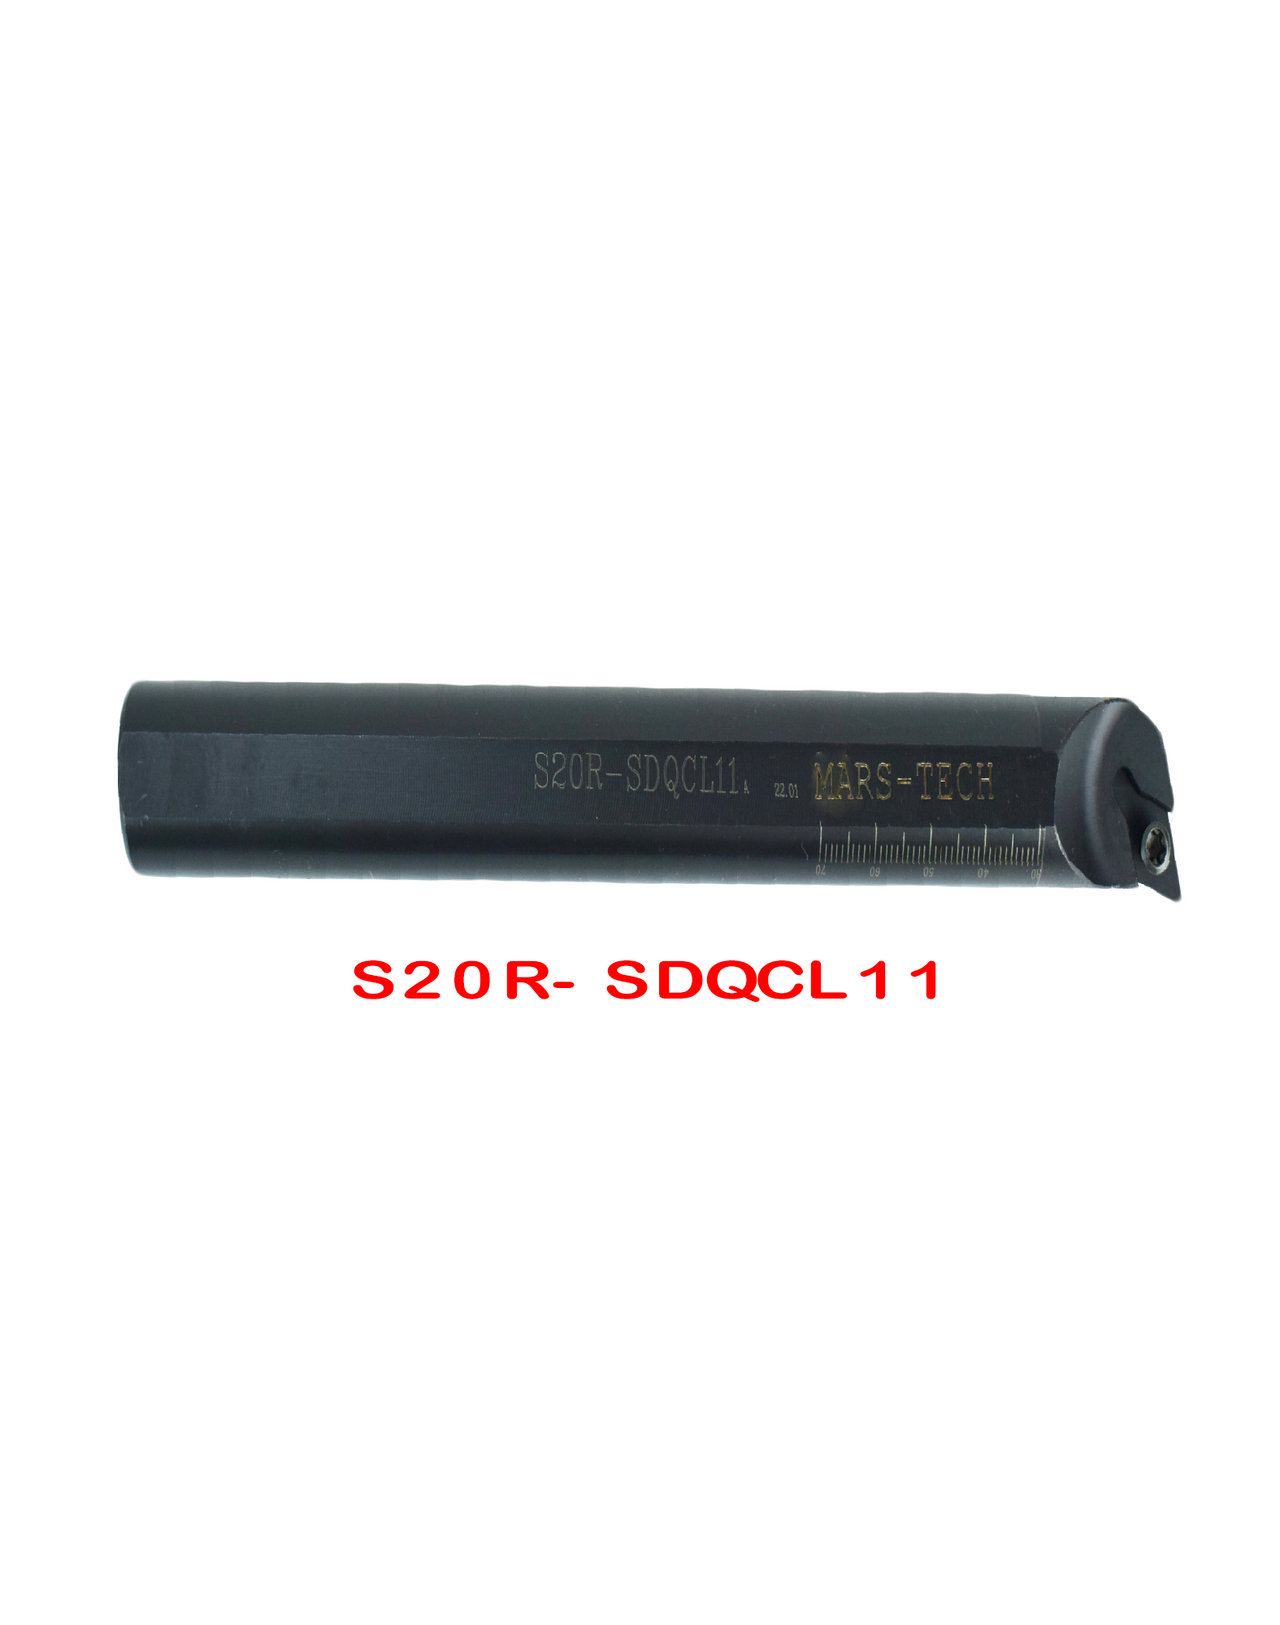 SDQCL/R Boring bar suitable to Dcmt0702/Dcmt11t3 pack of 1